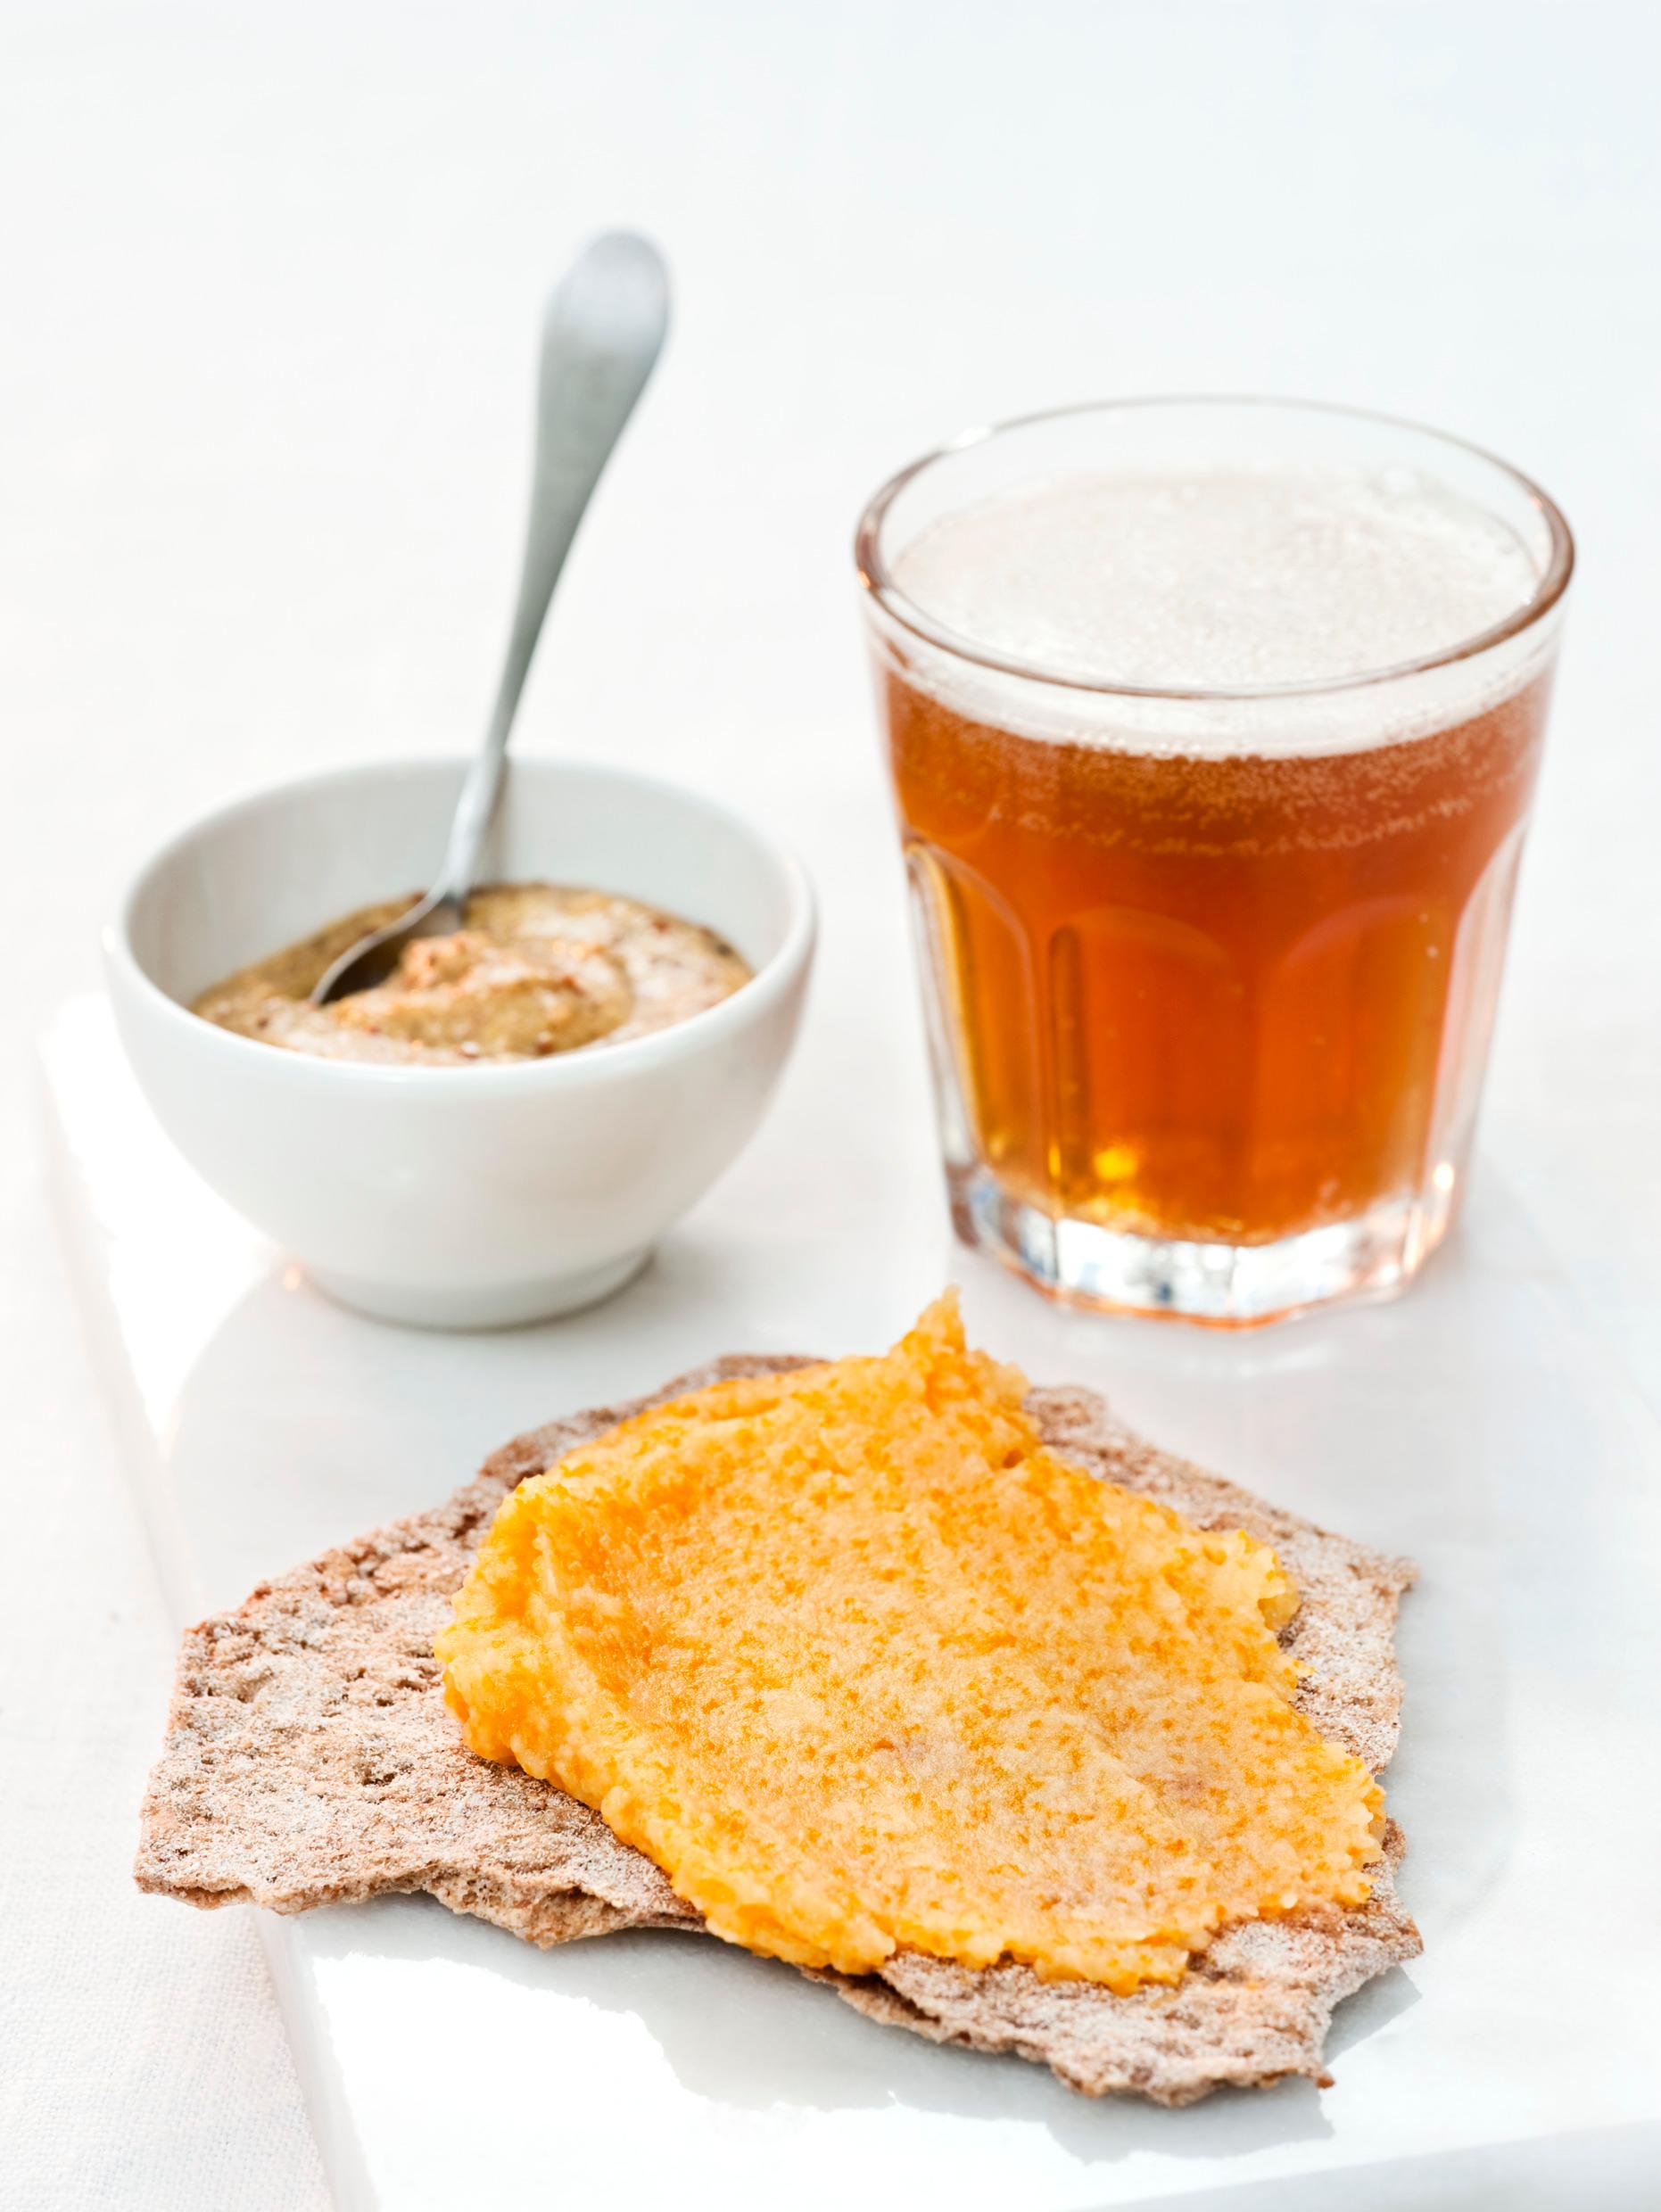 A glass of an amber-coloured dring, a crispbread and a bown with some spread.